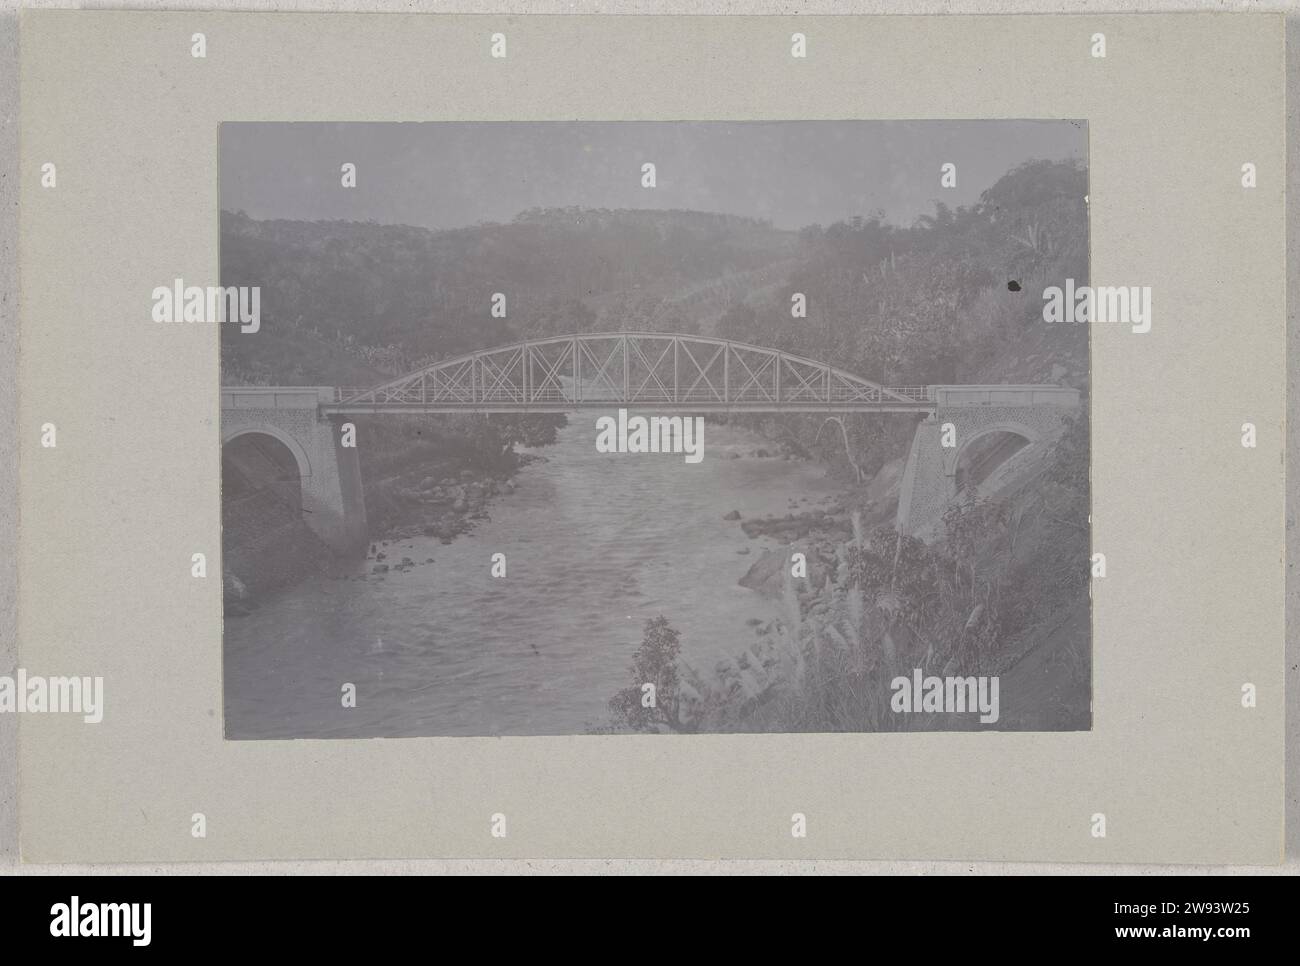 Bridge over a river, on its way to the wine merchant bay on Java, c. 1895 - c. 1915 photograph Bridge over a river, on its way to the wine merchant bay, Java, Dutch East Indies Java photographic support. paper. cardboard gelatin silver print  Indonesia Stock Photo